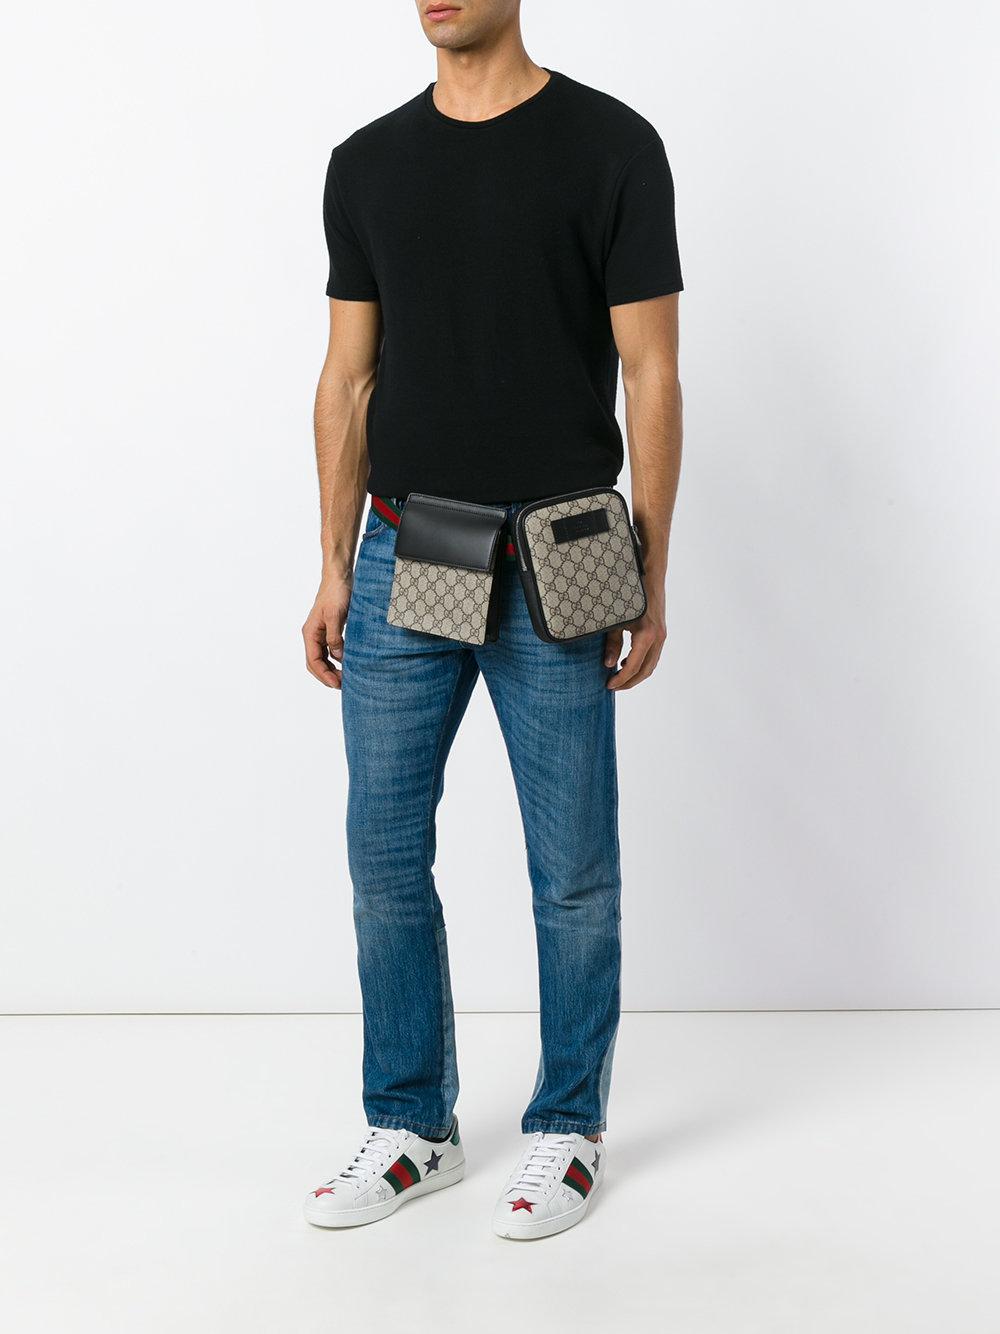 double gucci fanny pack